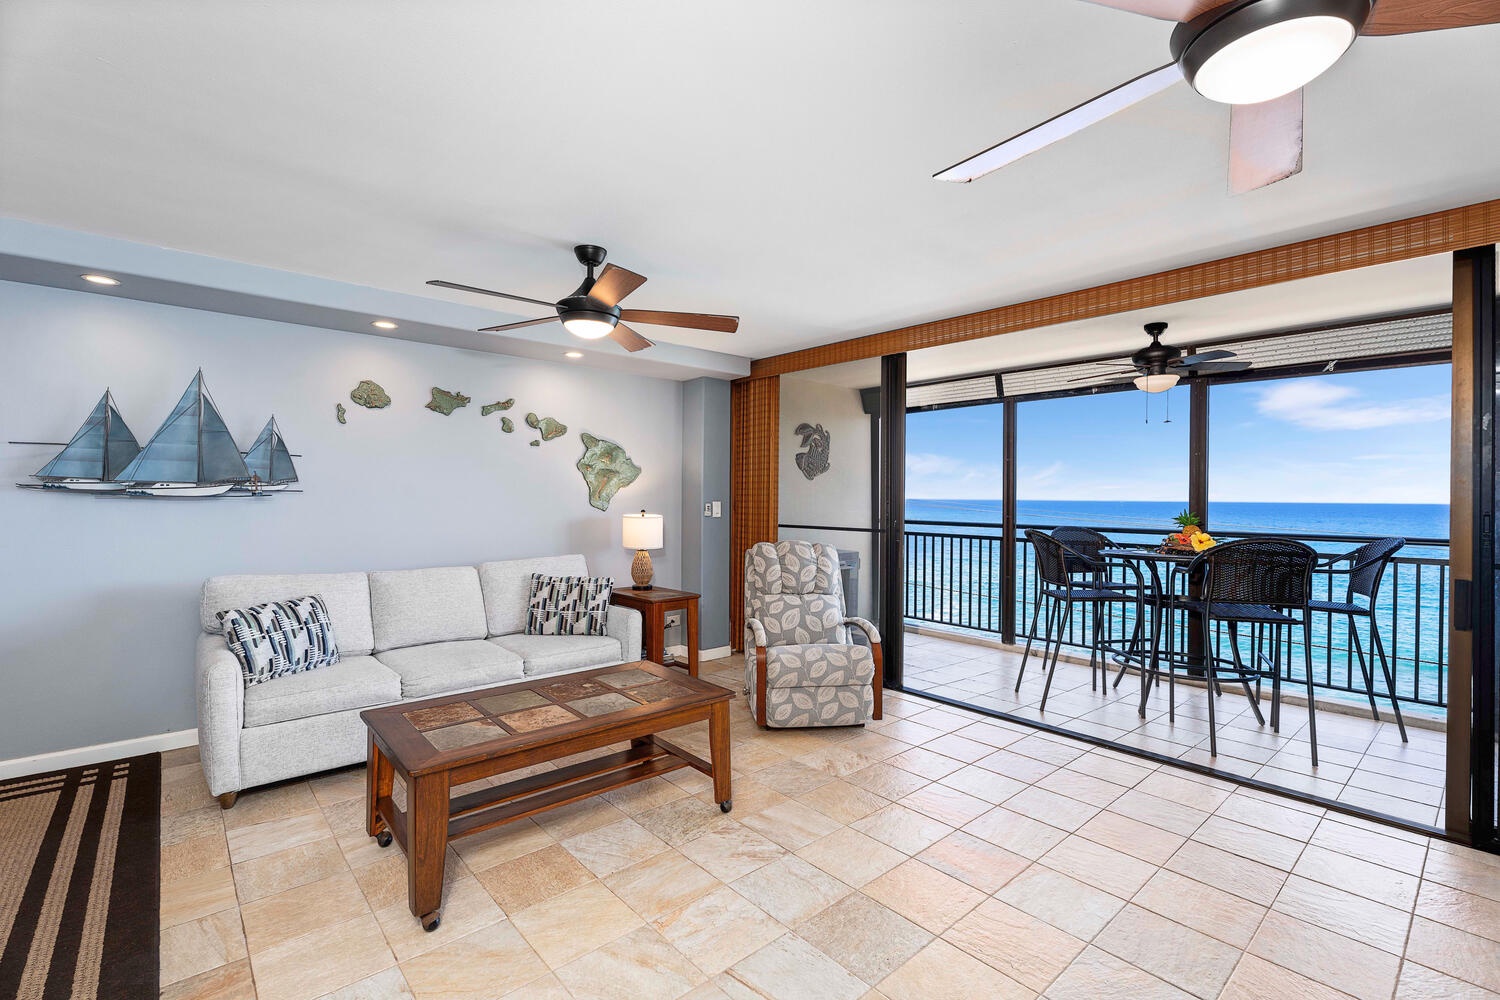 Kailua Kona Vacation Rentals, Kona Alii 403 - Seamless indoor-outdoor living with wall to wall windows to the lanai provide the perfect backdrop.